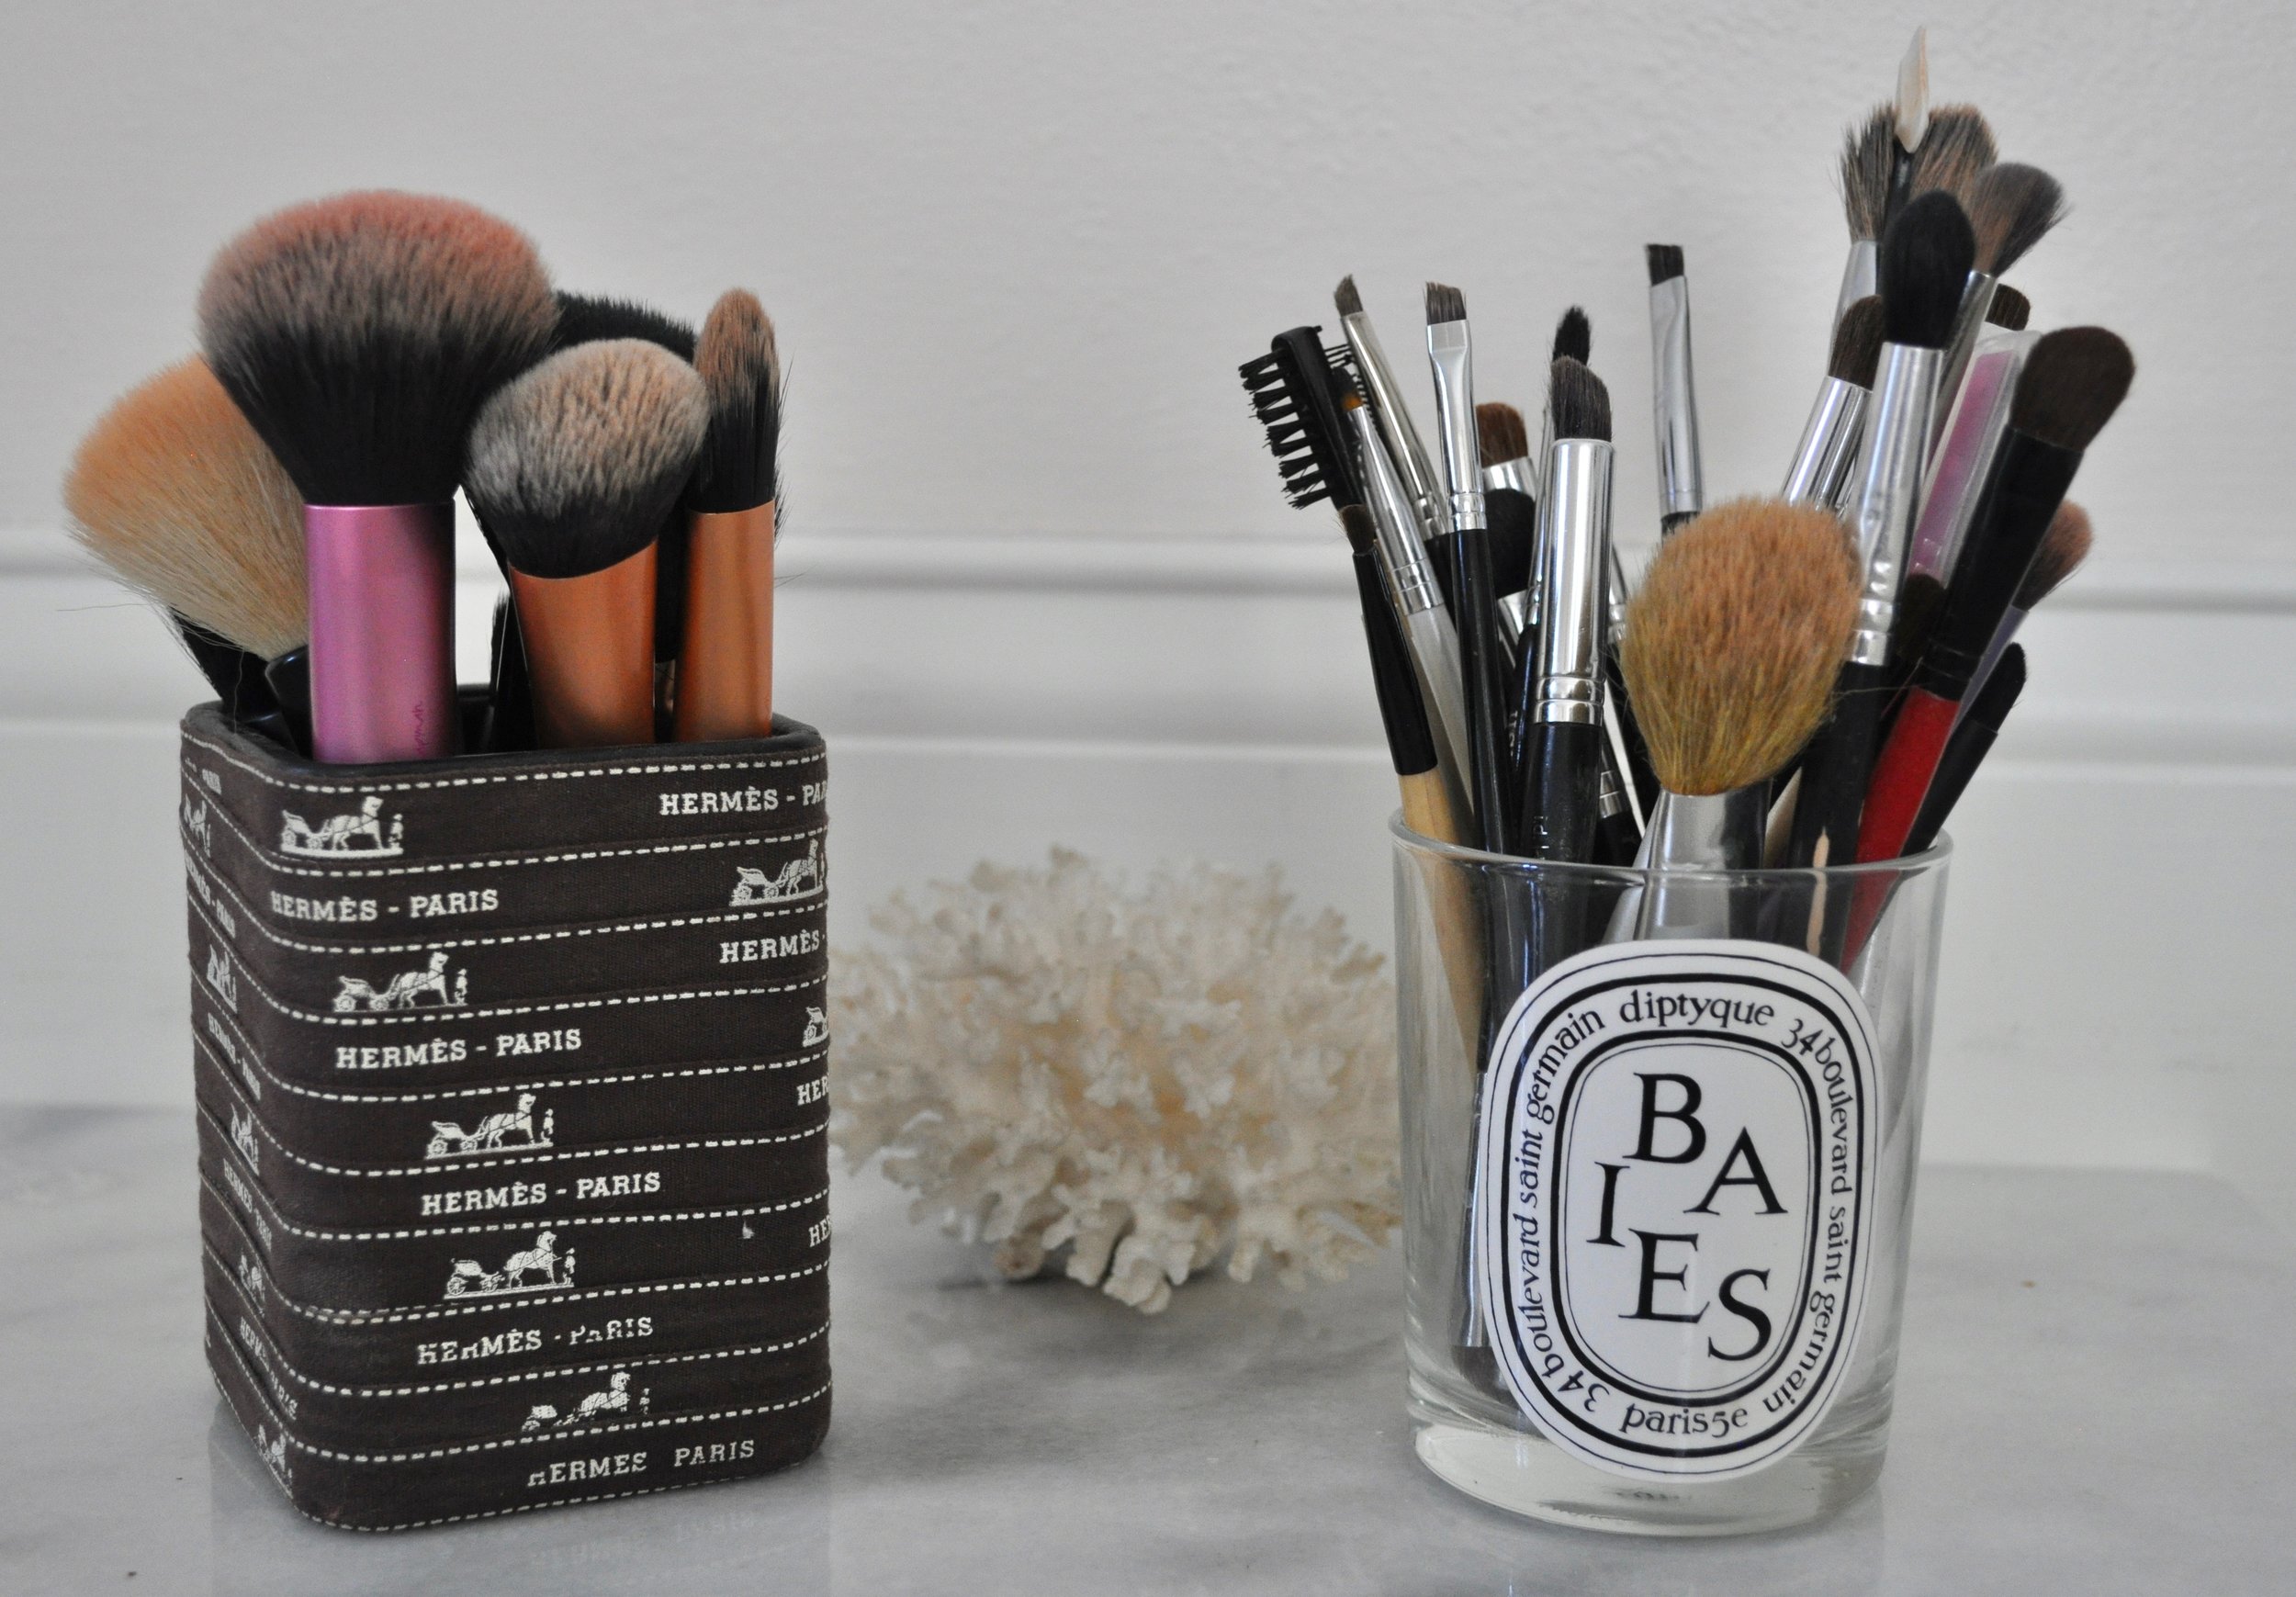 Cleaning Makeup Brushes | @beesandbubbles